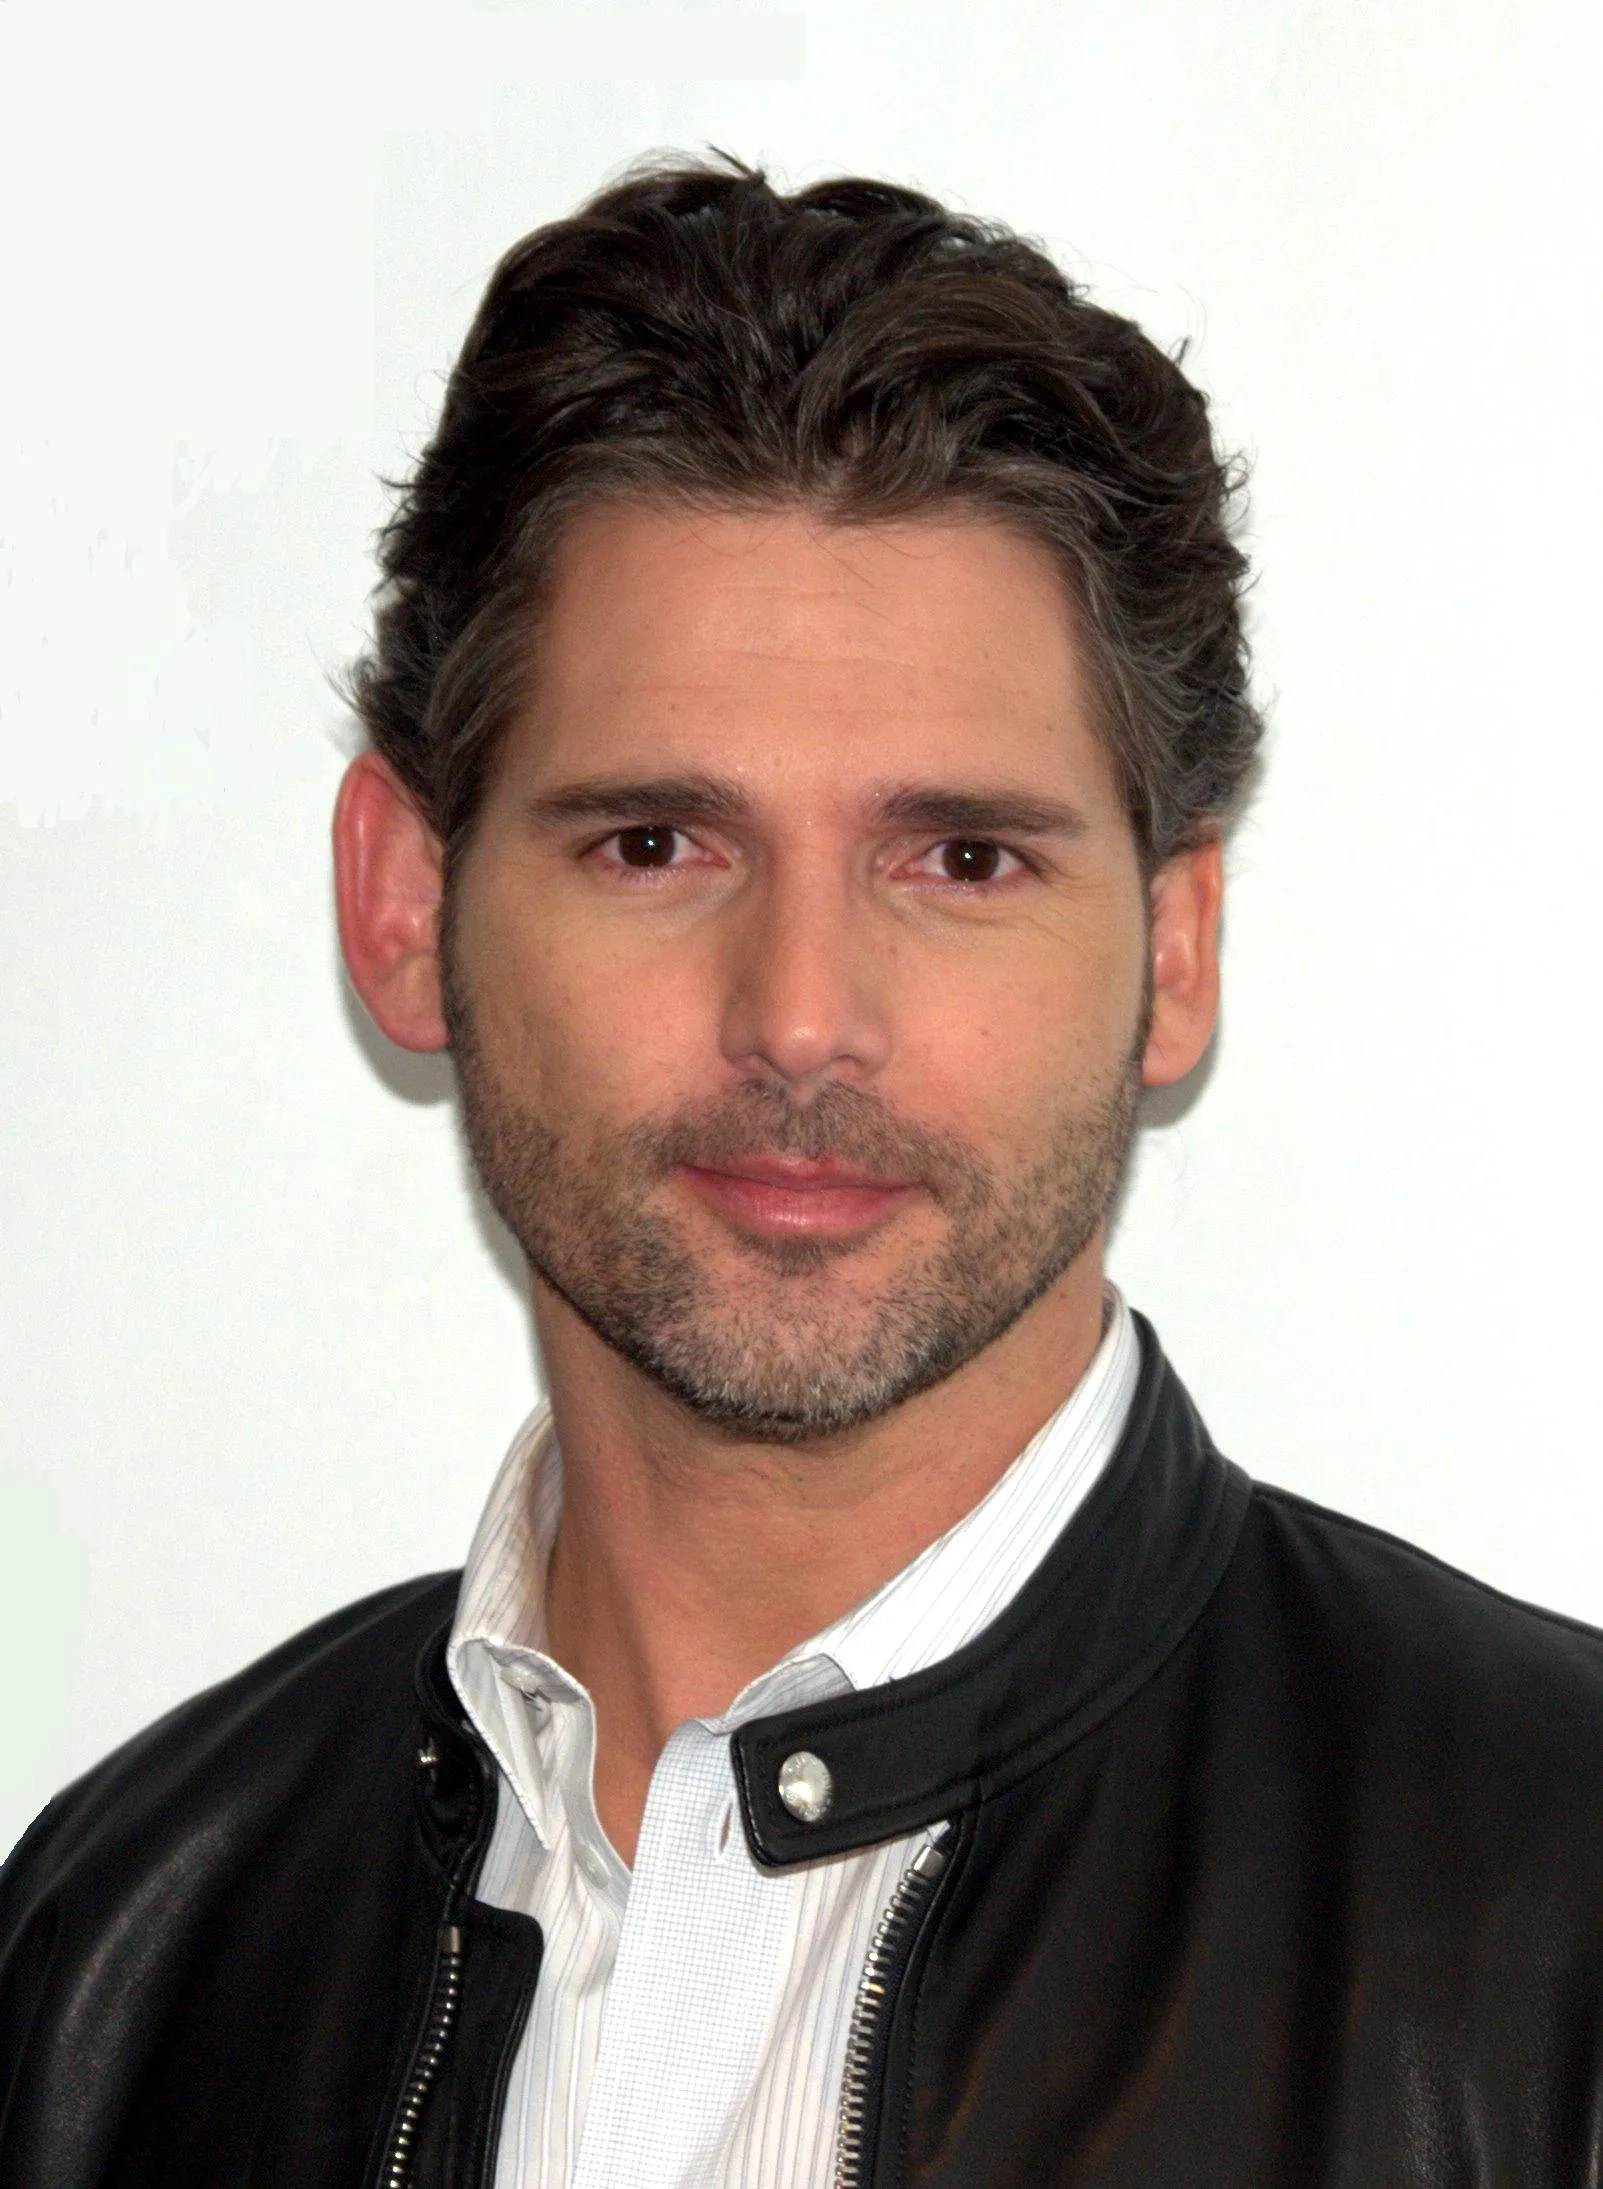 What Star Sign is Eric Bana?